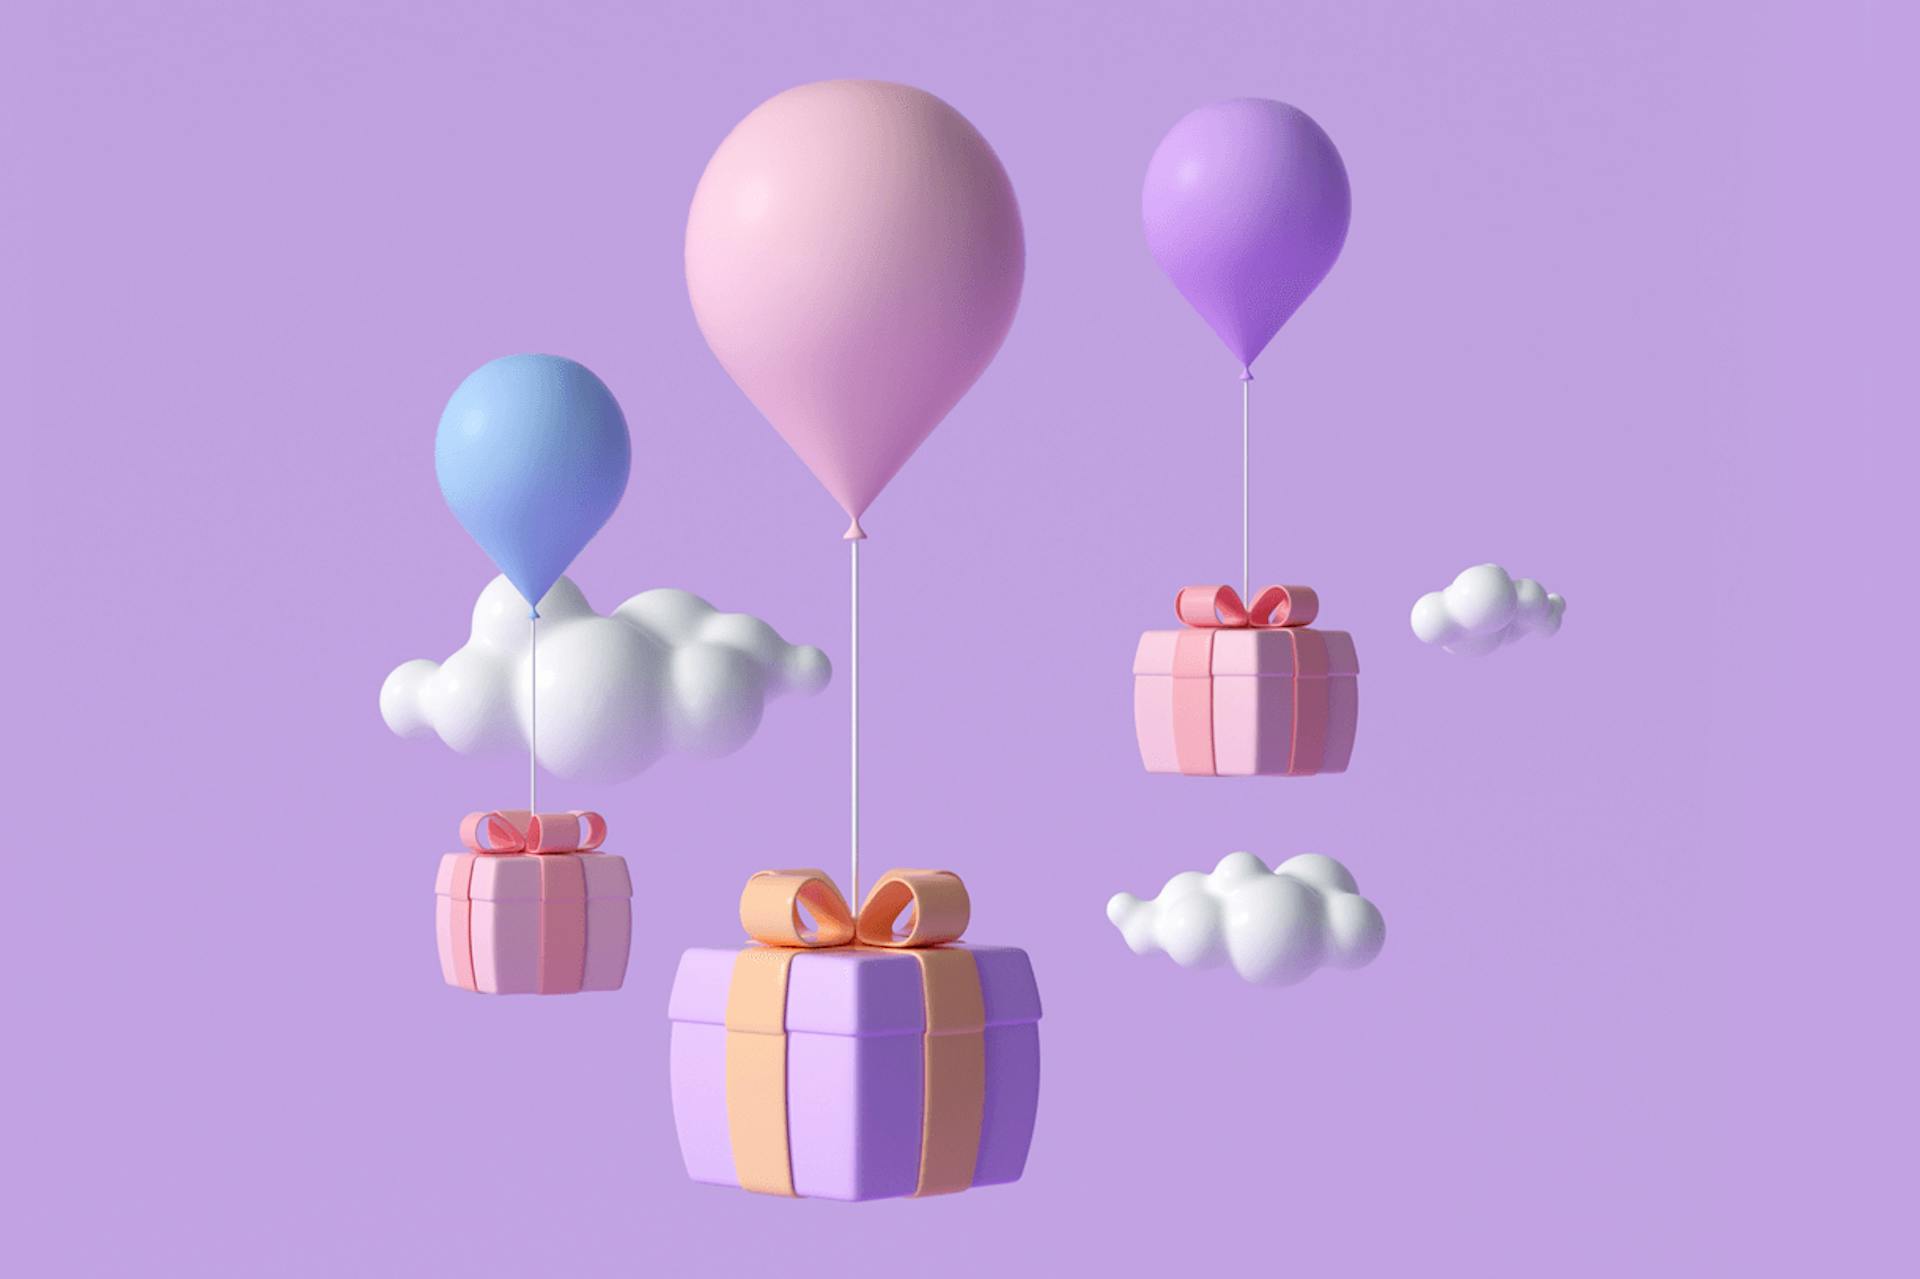 Illustration showing three different sized wrapped packages being held up by multi-colored balloons, surrounded by clouds, on a purple background. Influencer gifting blog post and guide.